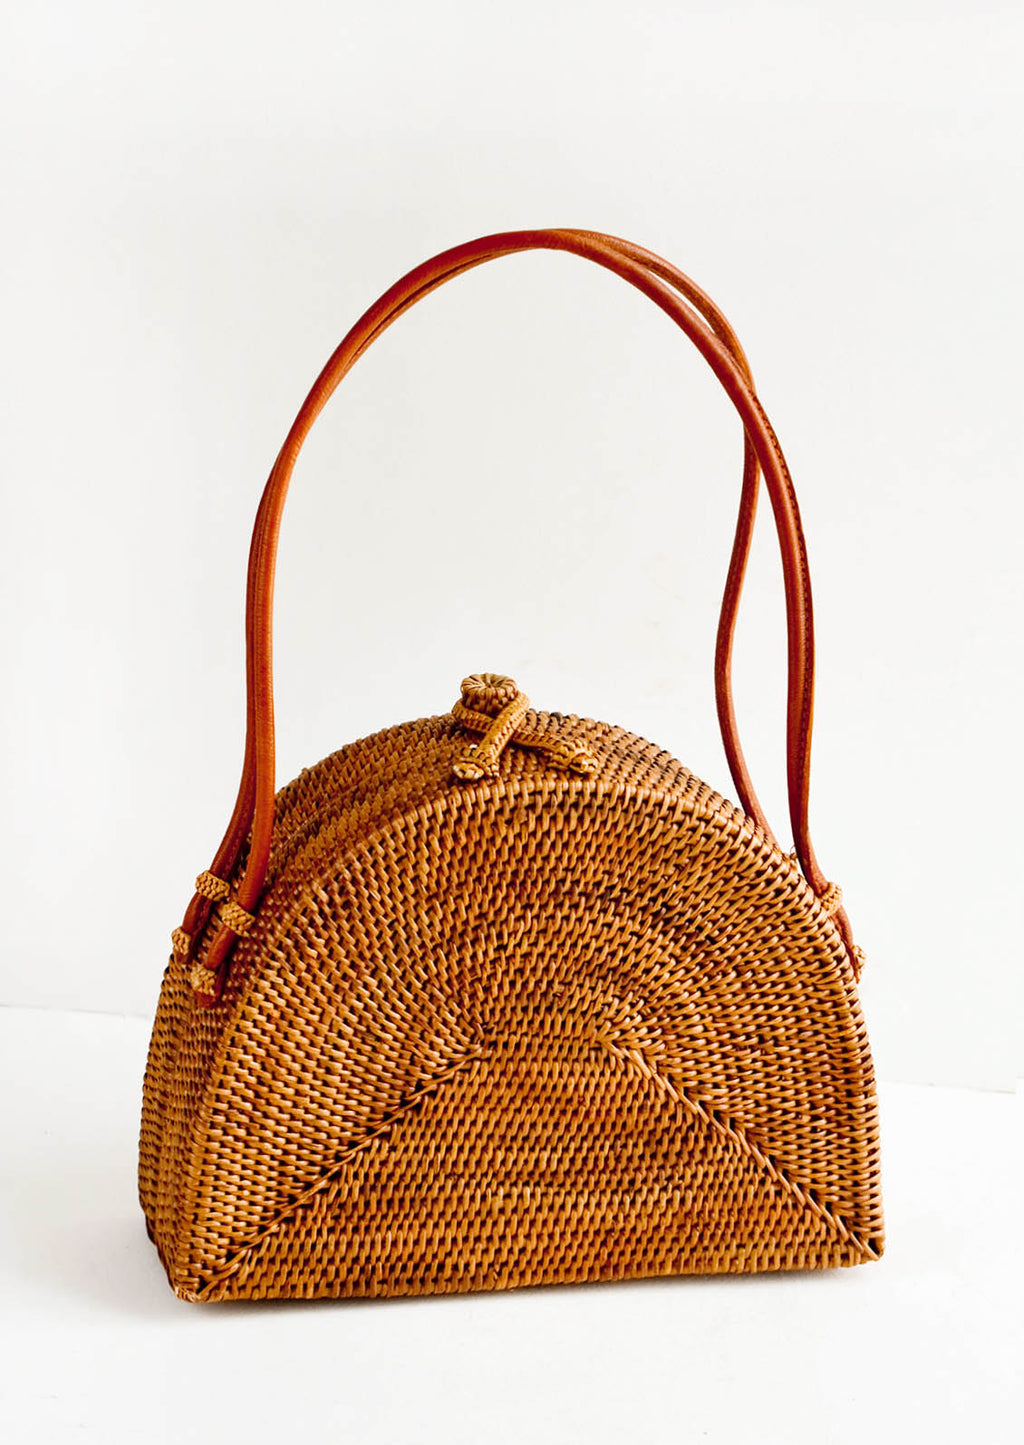 1: Half-oval shaped, structured handbag made from smoked rattan. Tanned leather carrying handles.